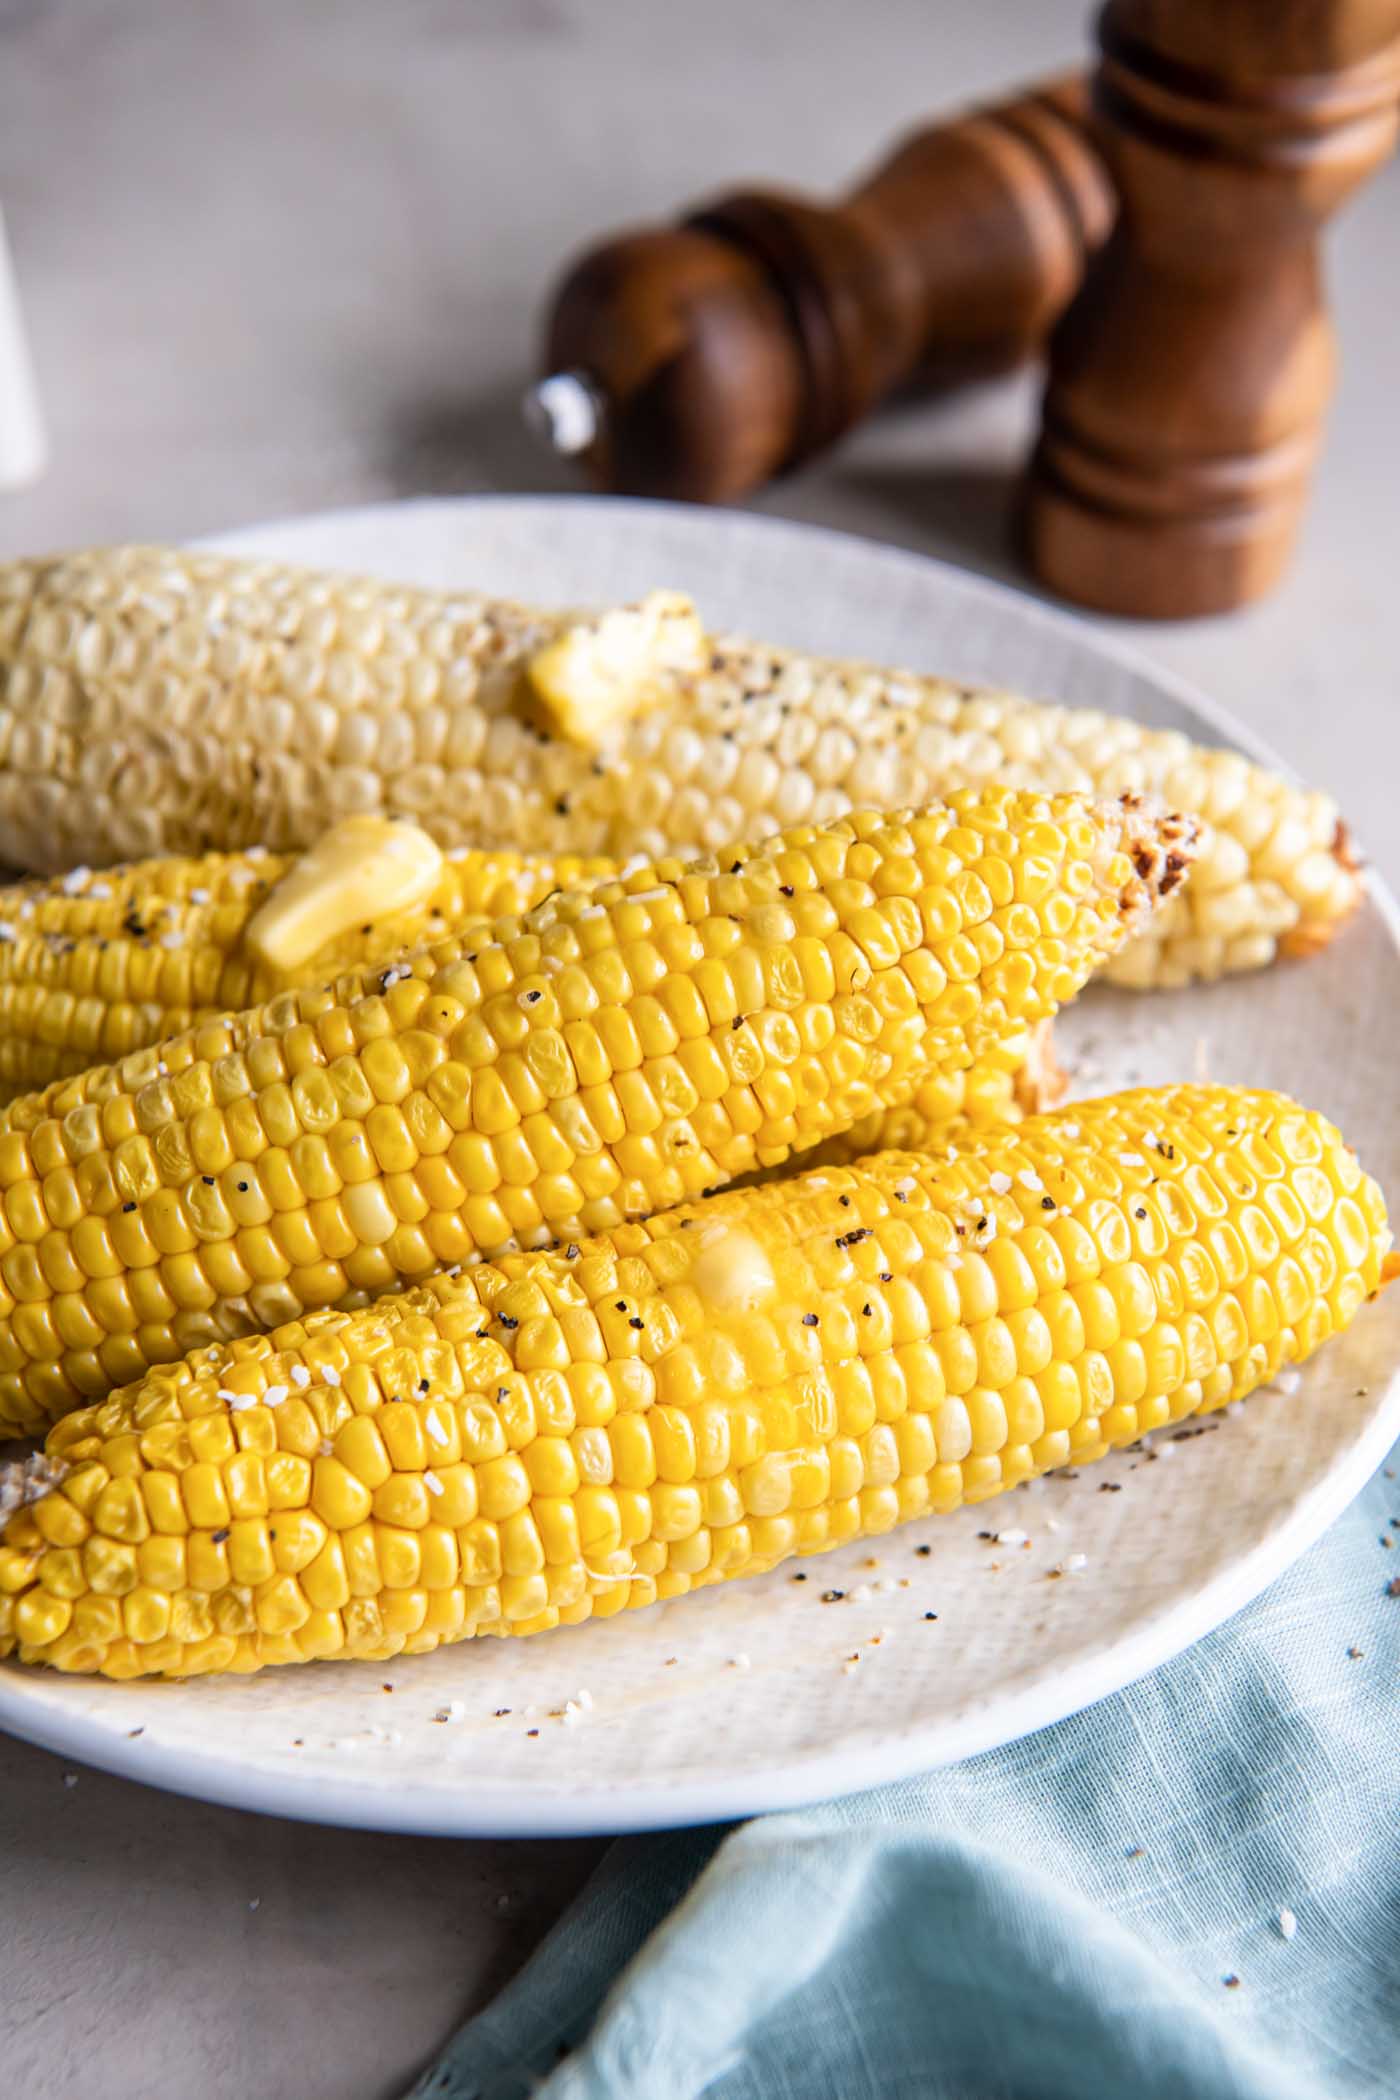 Four ears of corn on the cob on a plate with melty butter, salt and pepper.